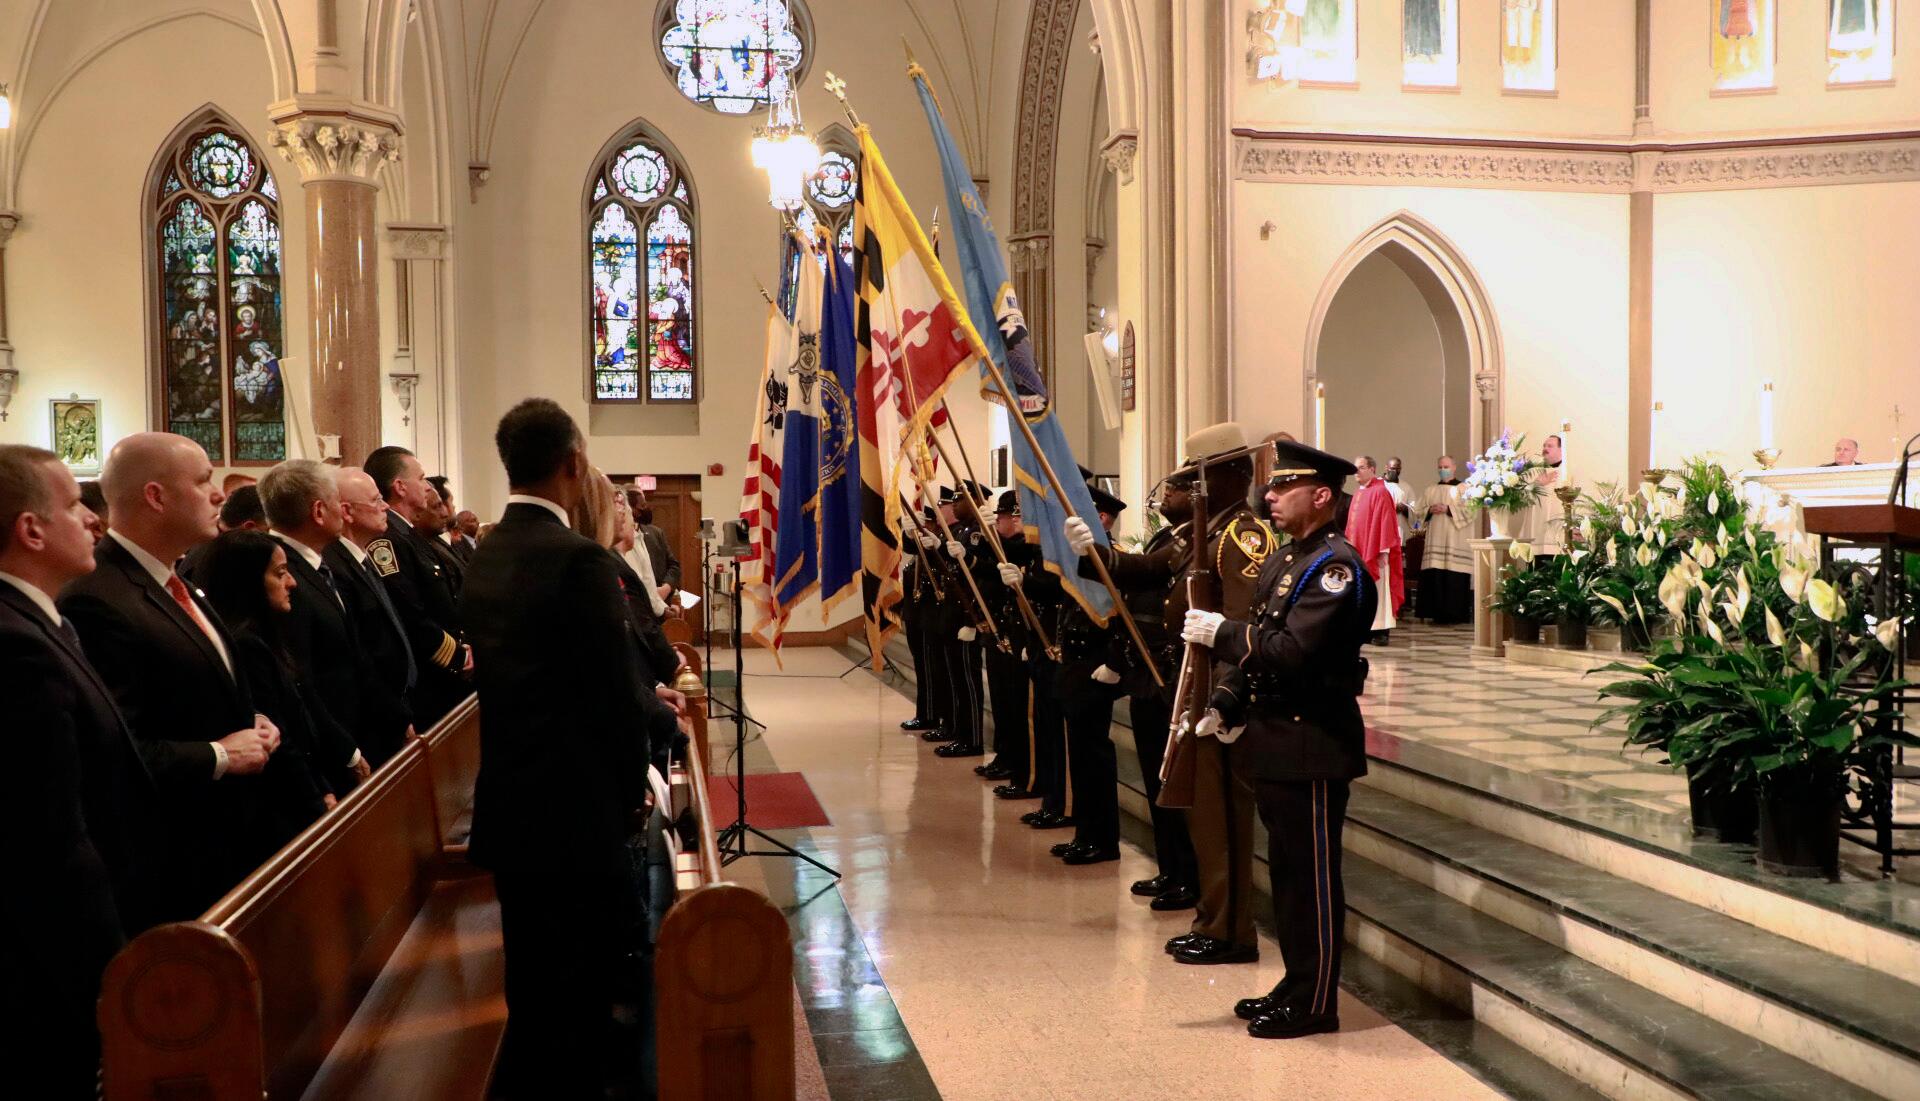 Blue Mass image showing the attendees and color guard in St. Patrick Church on May 3.